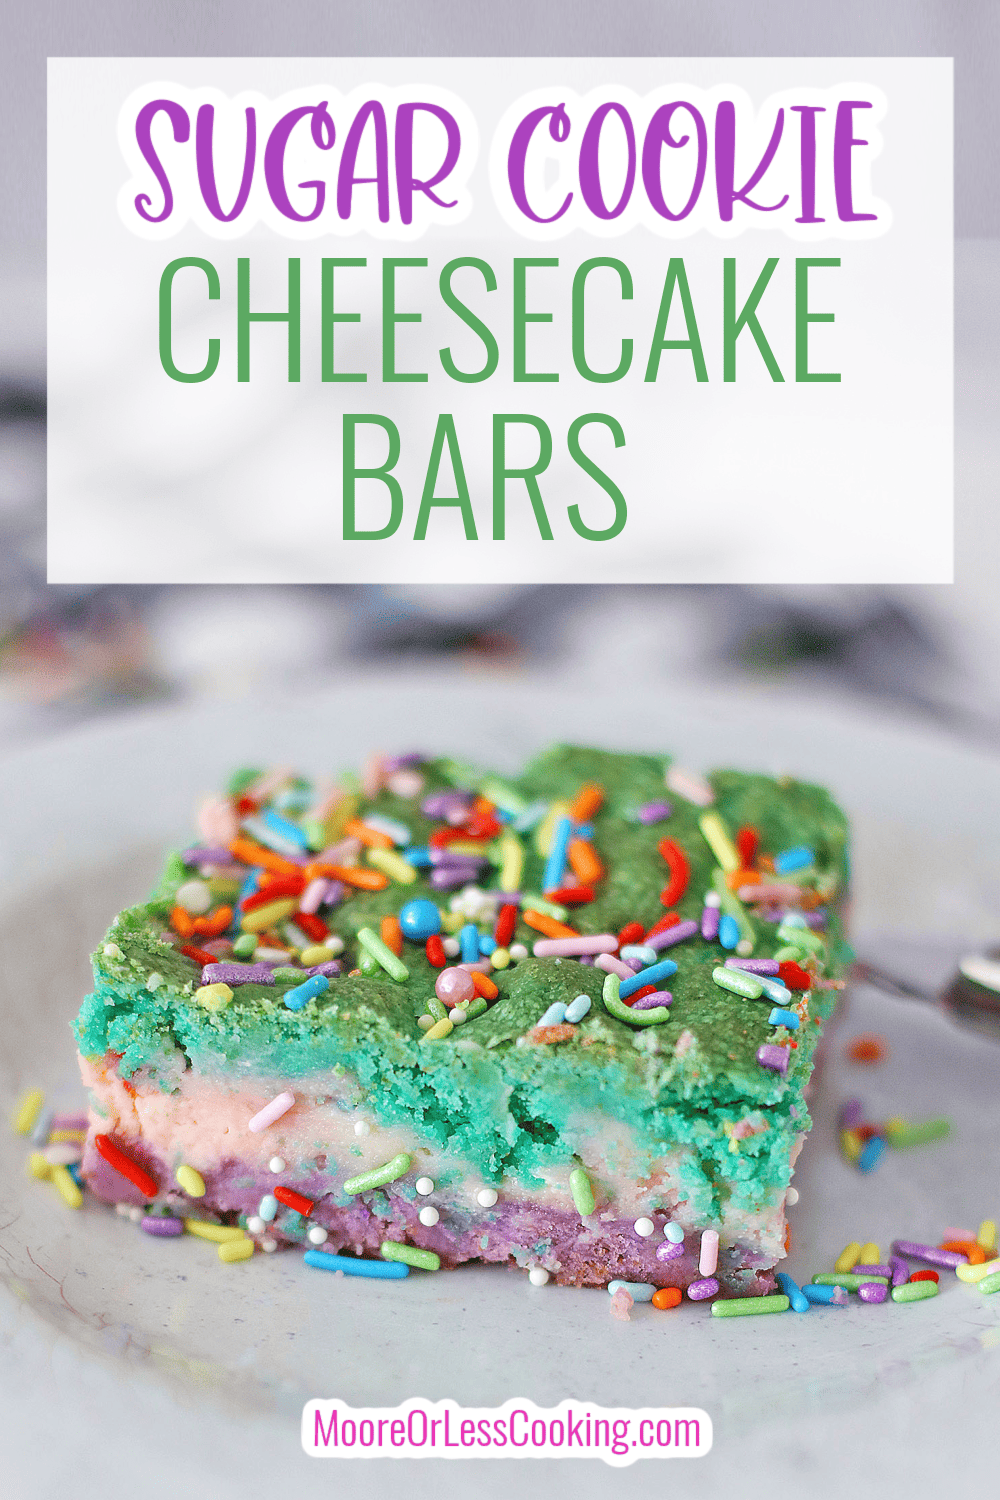 These Sugar Cookie Cheesecake Bars are a delightful 3 layer dessert that sandwiches a sweet cheesecake filling between two brightly colored cookie dough layers. Top it off with fun sprinkles for a dessert that's perfect for holidays and parties. via @Mooreorlesscook